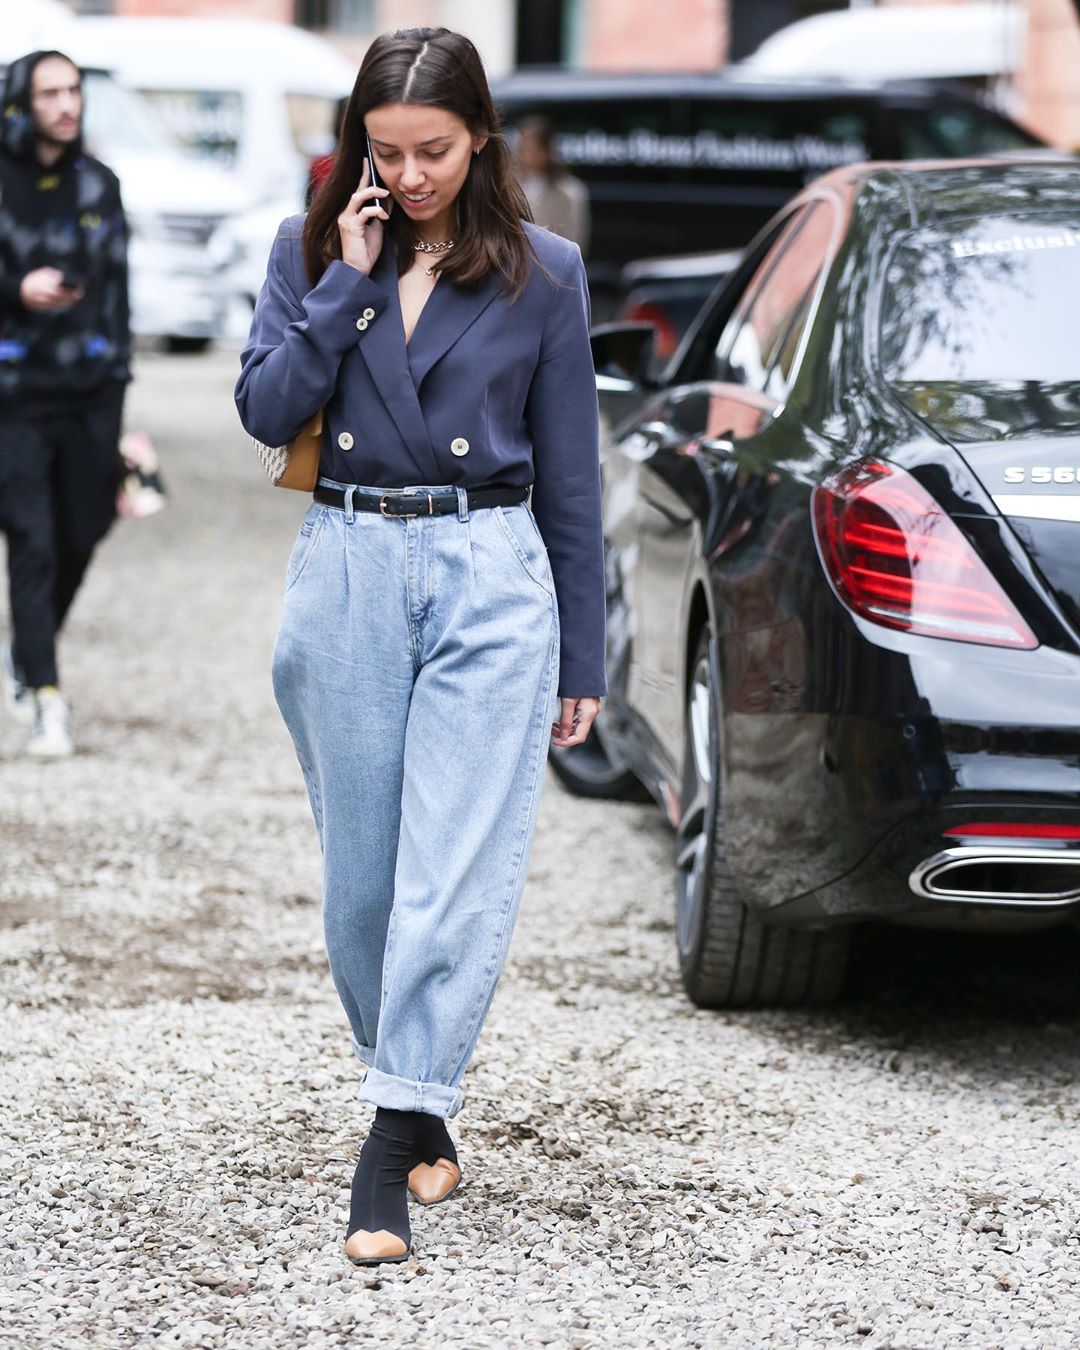 Le Fashion: High-Waisted Mom Jeans are Still Having a Fashion Moment